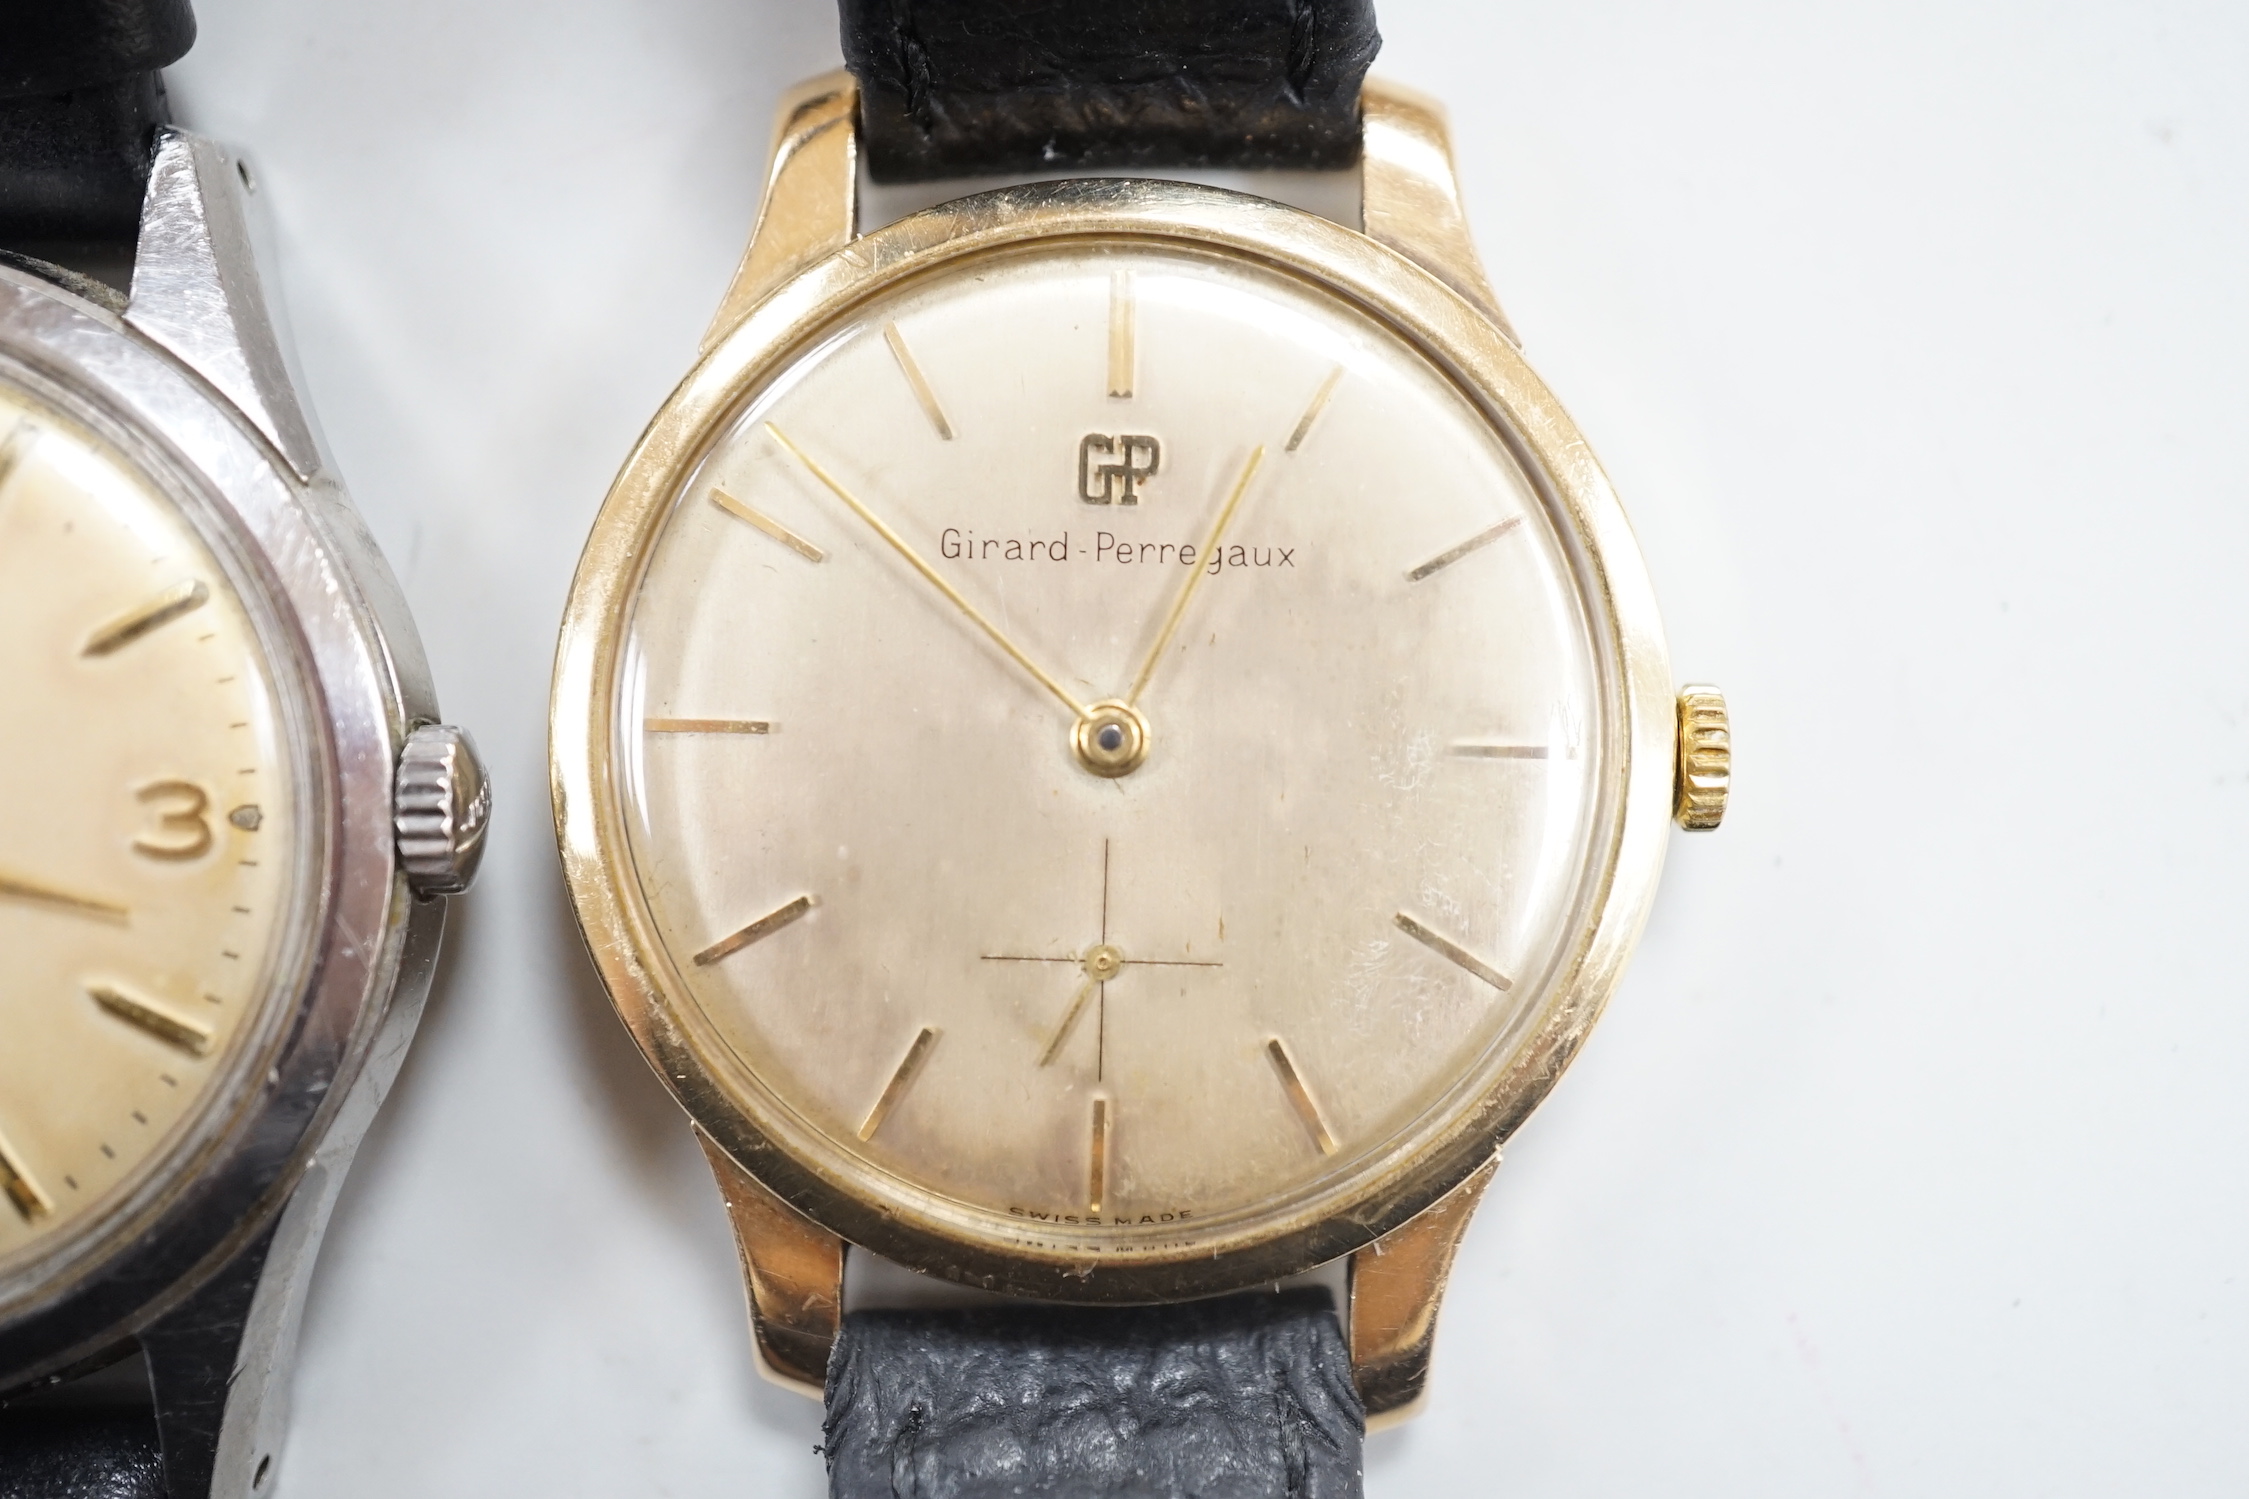 A gentleman's 9ct gold Girard Perregaux manual wind wrist watch, on associated leather strap and a gentleman's stainless steel Tissot Seastar automatic wrist watch.